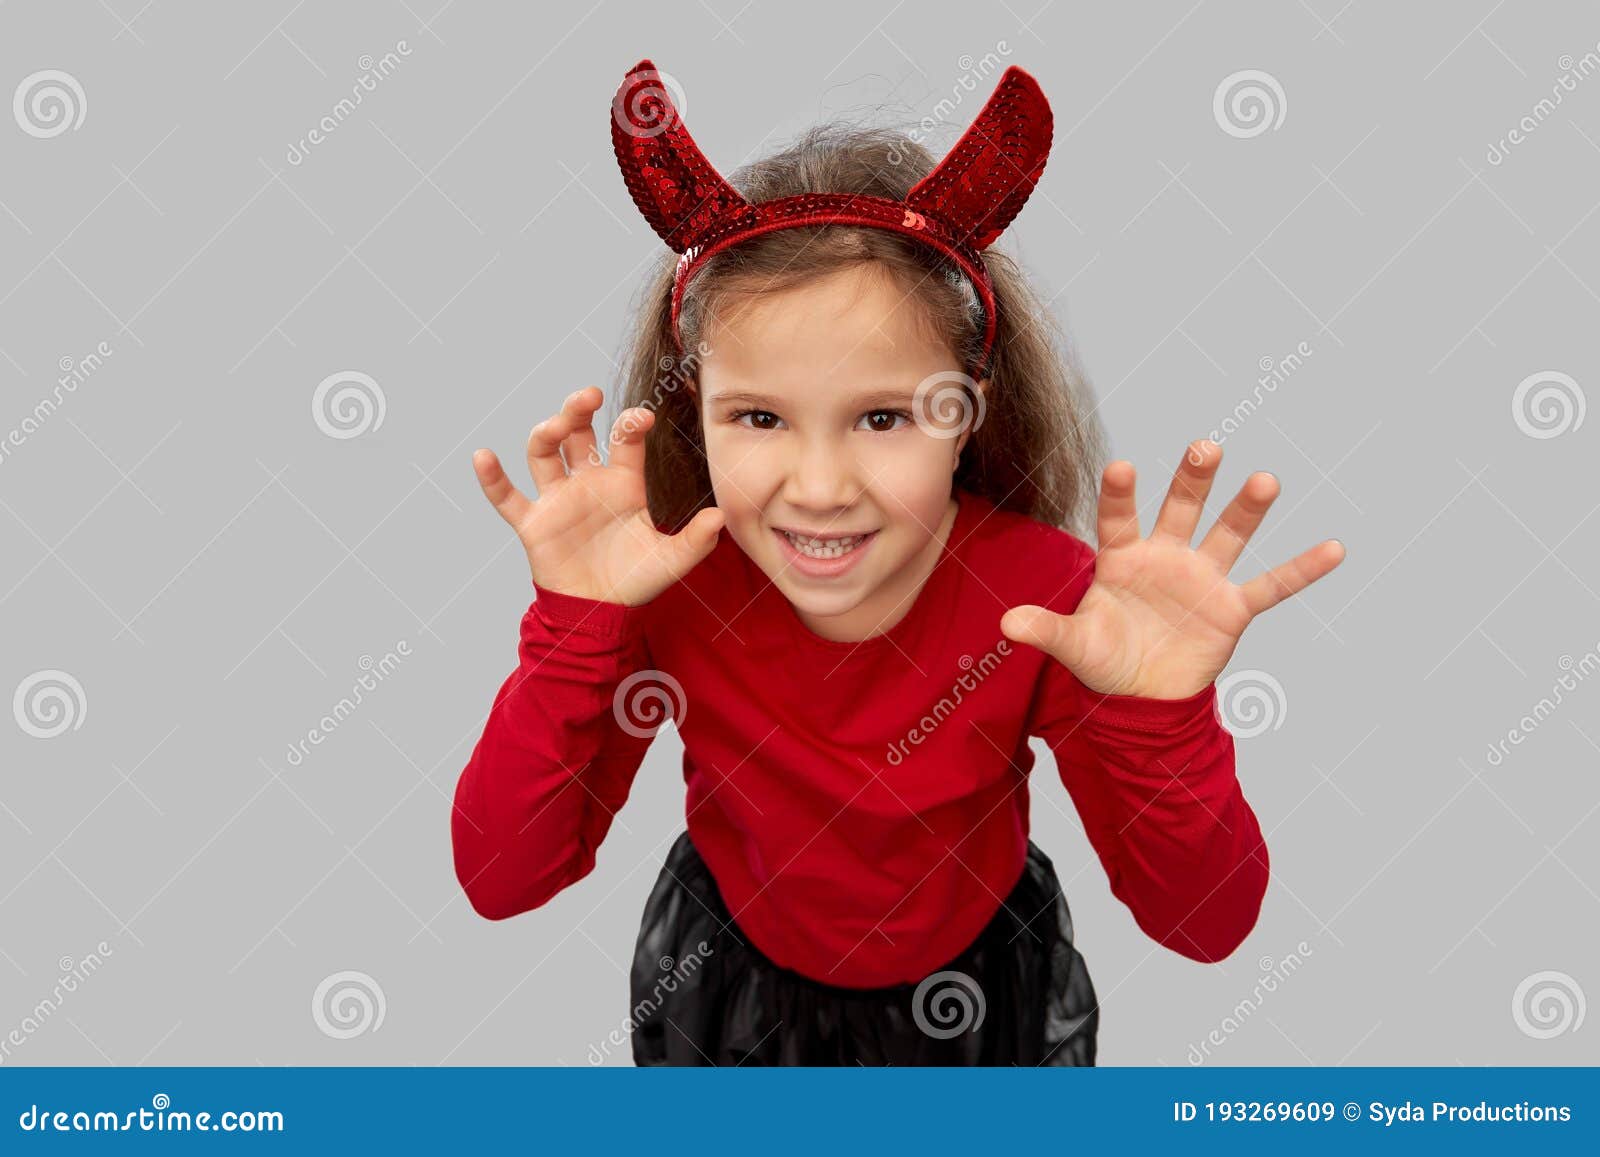 Girl Costume with Devil`s Horns on Halloween Stock Image - Image of ...